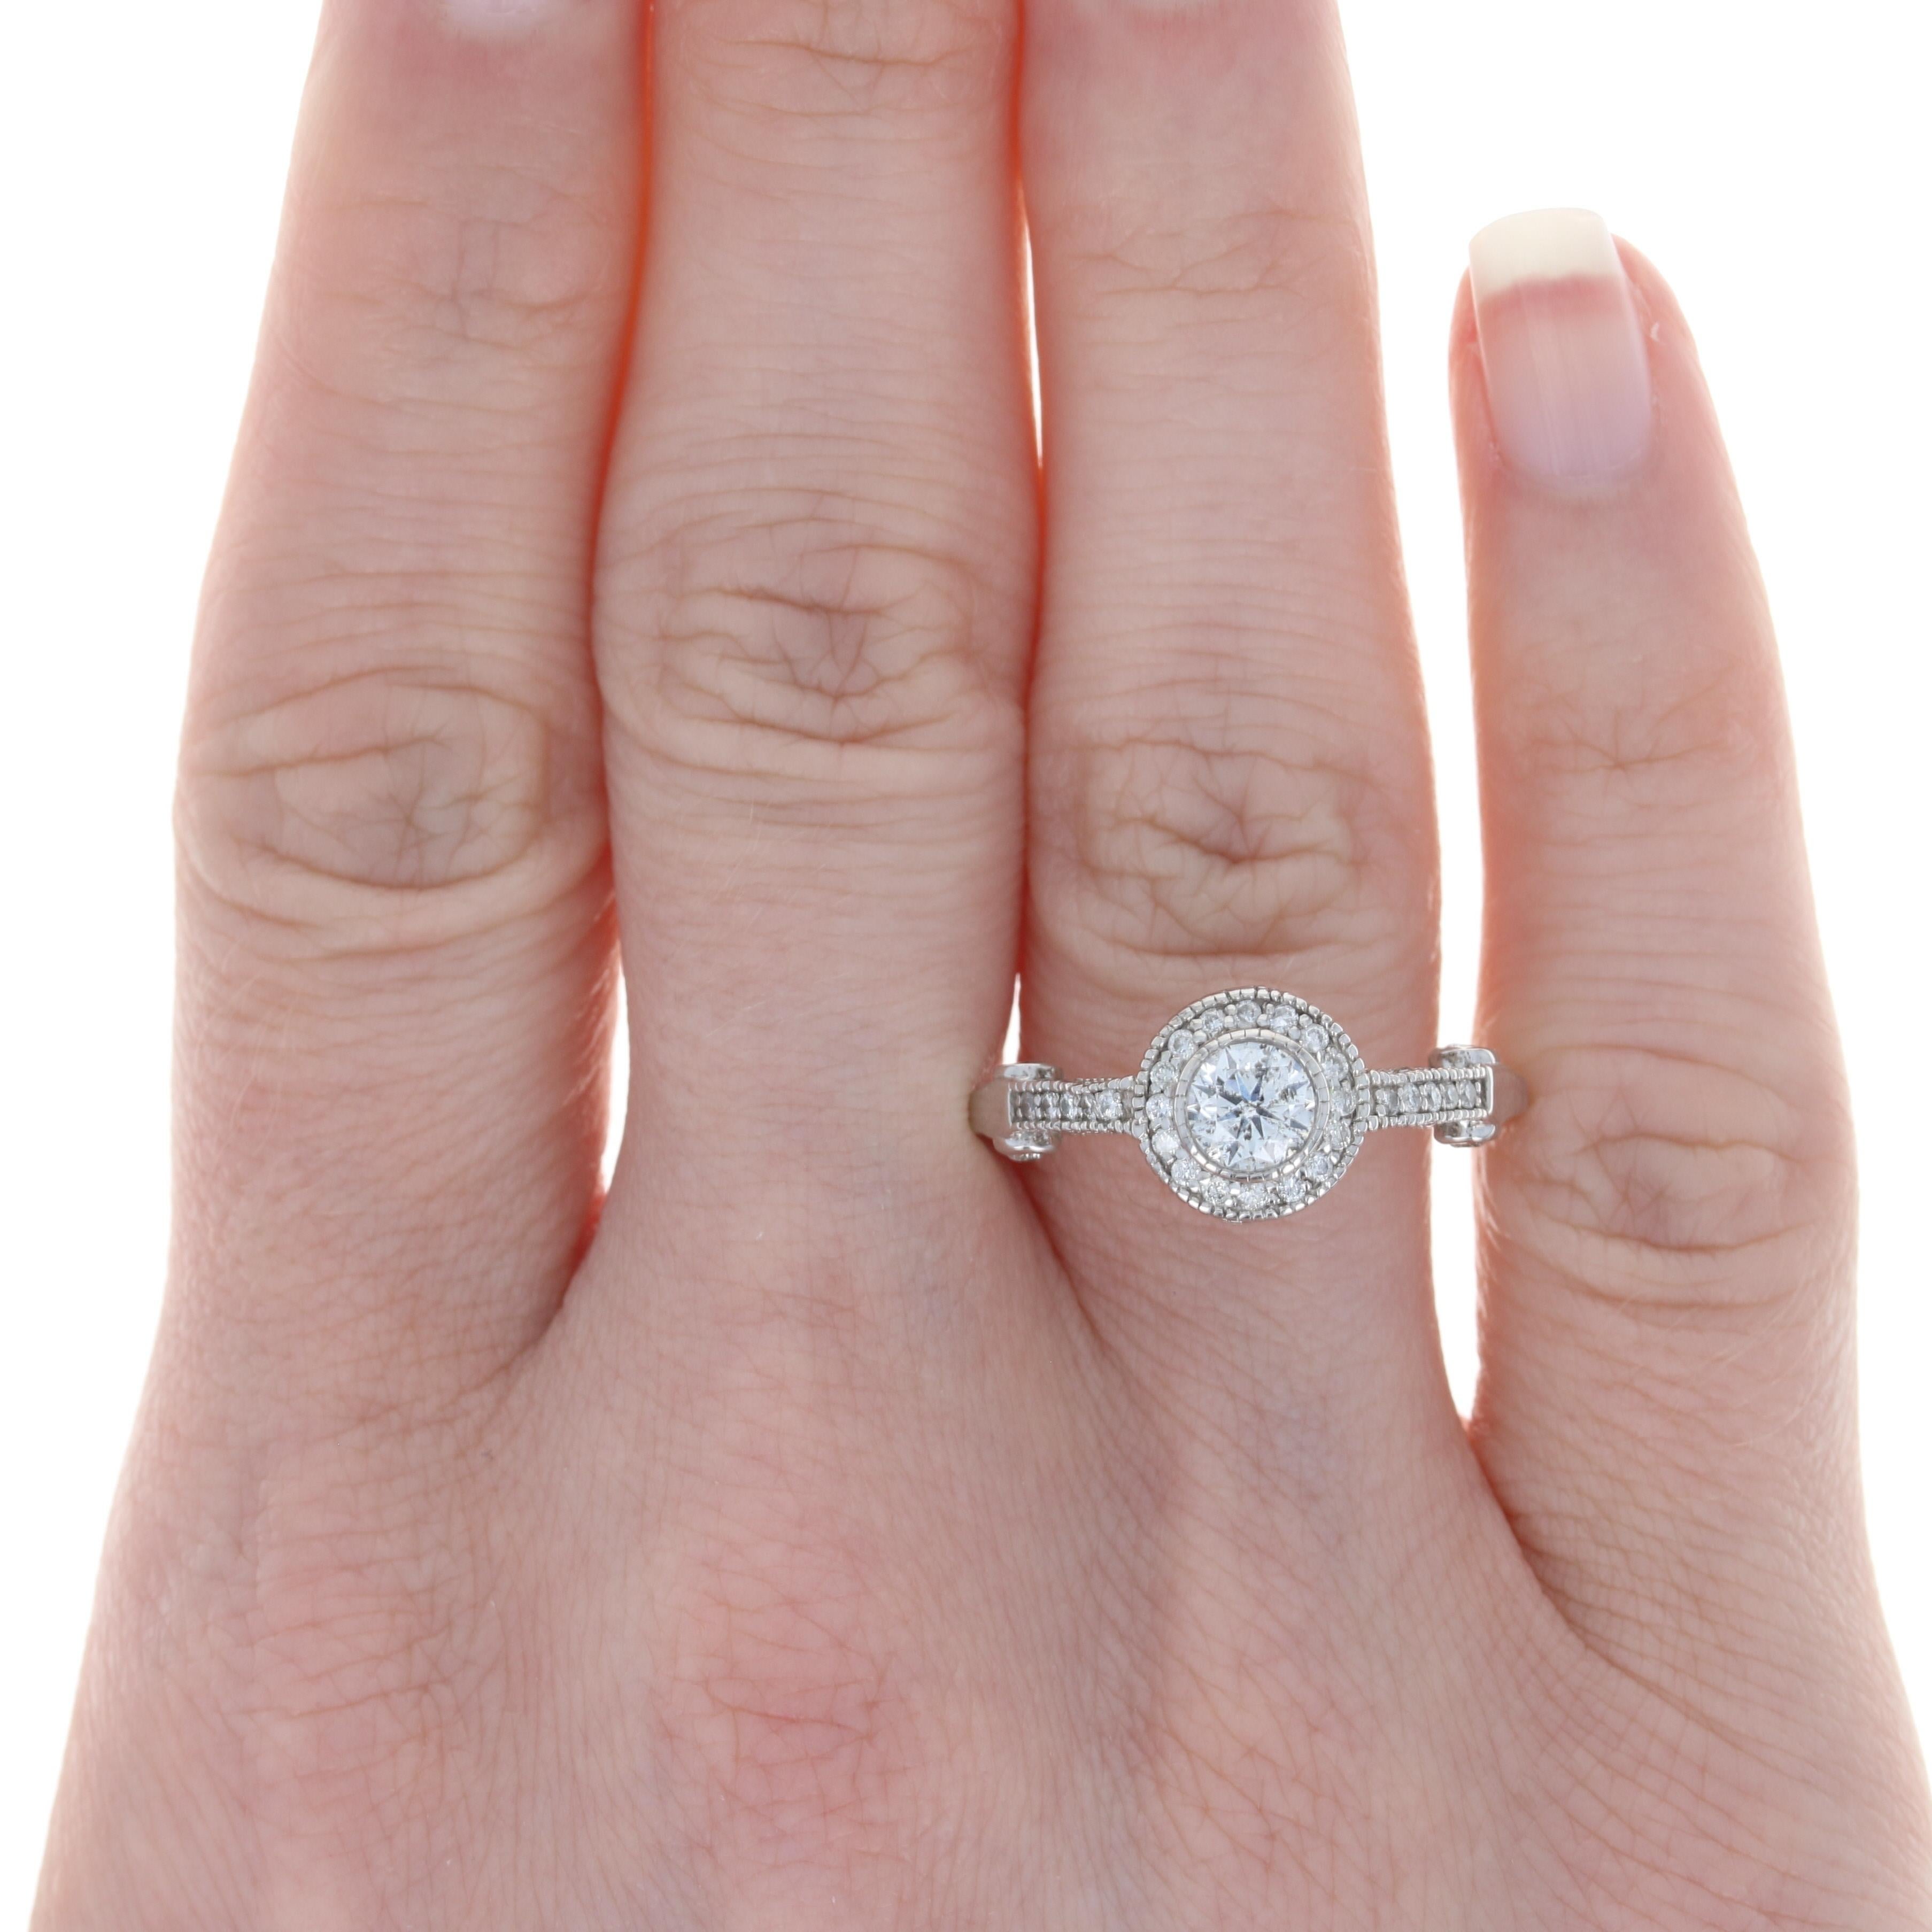 Size: 9 1/4
Sizing Fee: Up or Down 2 sizes for $25

Metal Content: 14k White Gold

Stone Information: 
Natural Diamond Solitaire
Carat: .50ct
Cut:  Round Brilliant
Color: H 
Clarity: I1 (eye clean)

Natural Diamond Accents
Carats: .78ctw 
Cut: Round